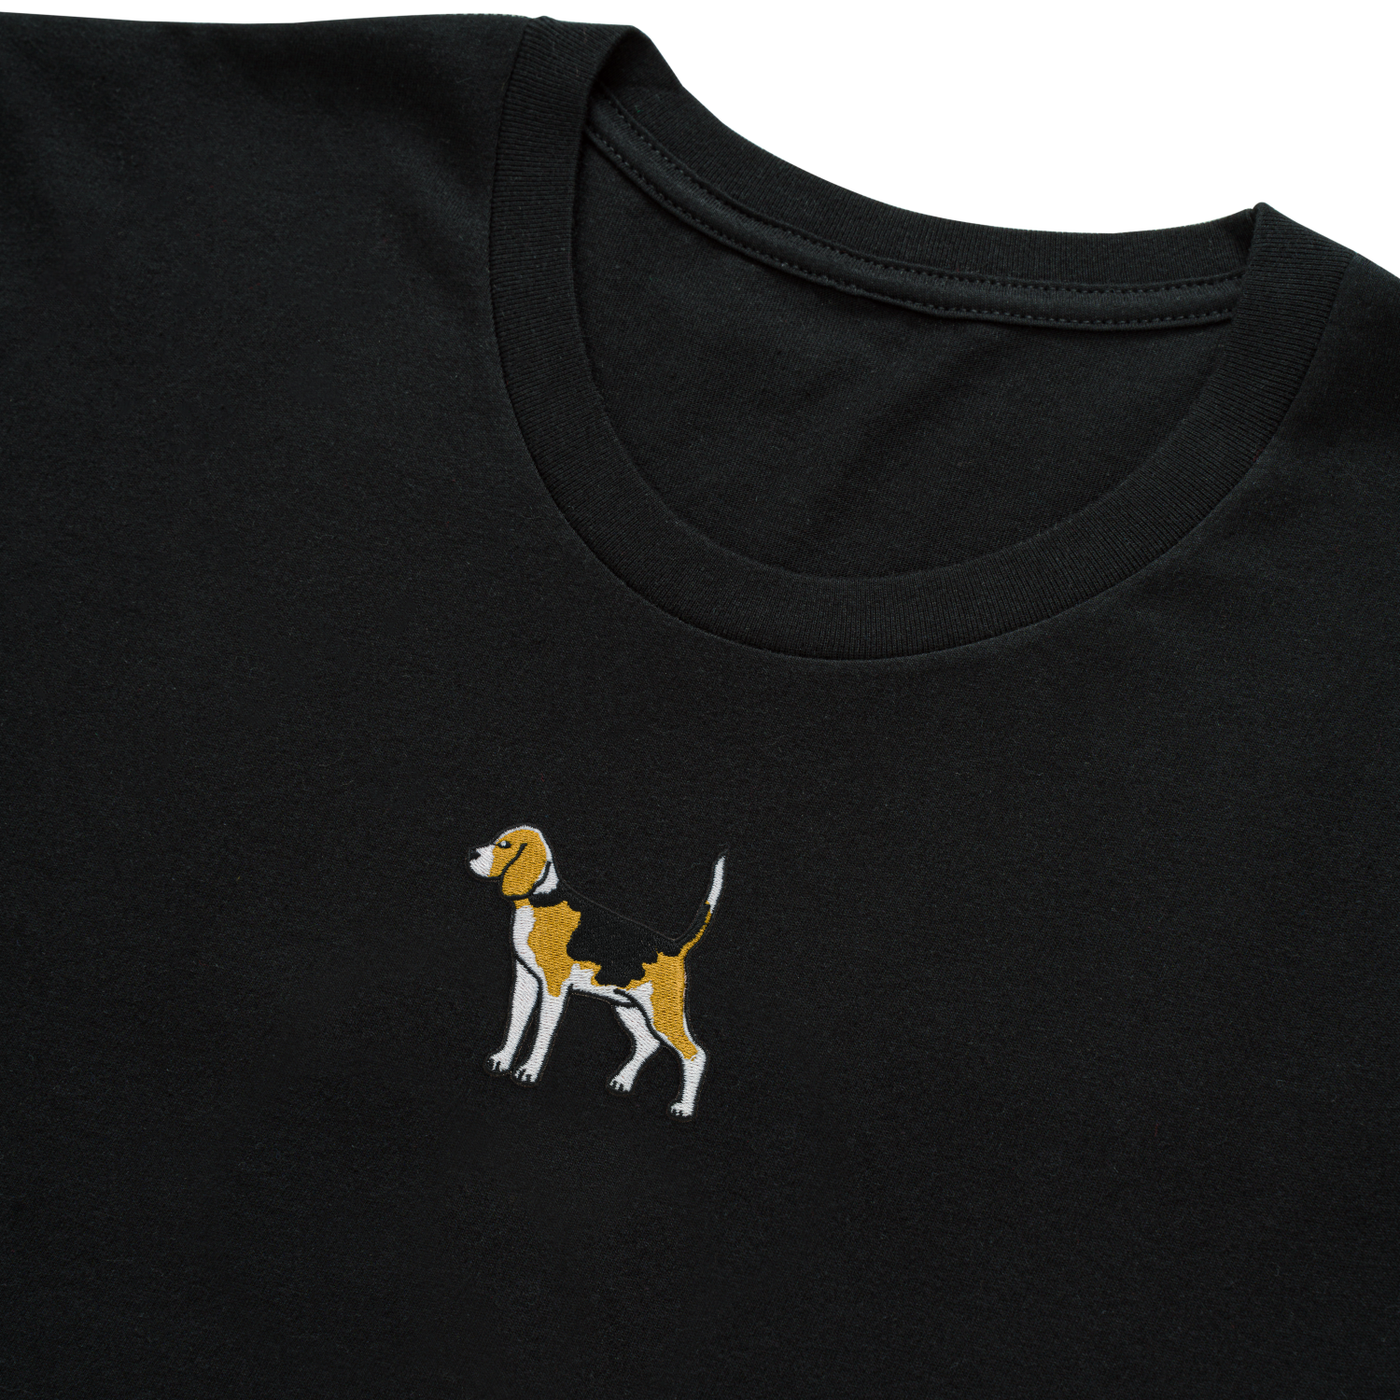 Bobby's Planet Men's Embroidered Beagle T-Shirt from Paws Dog Cat Animals Collection in Black Color#color_black